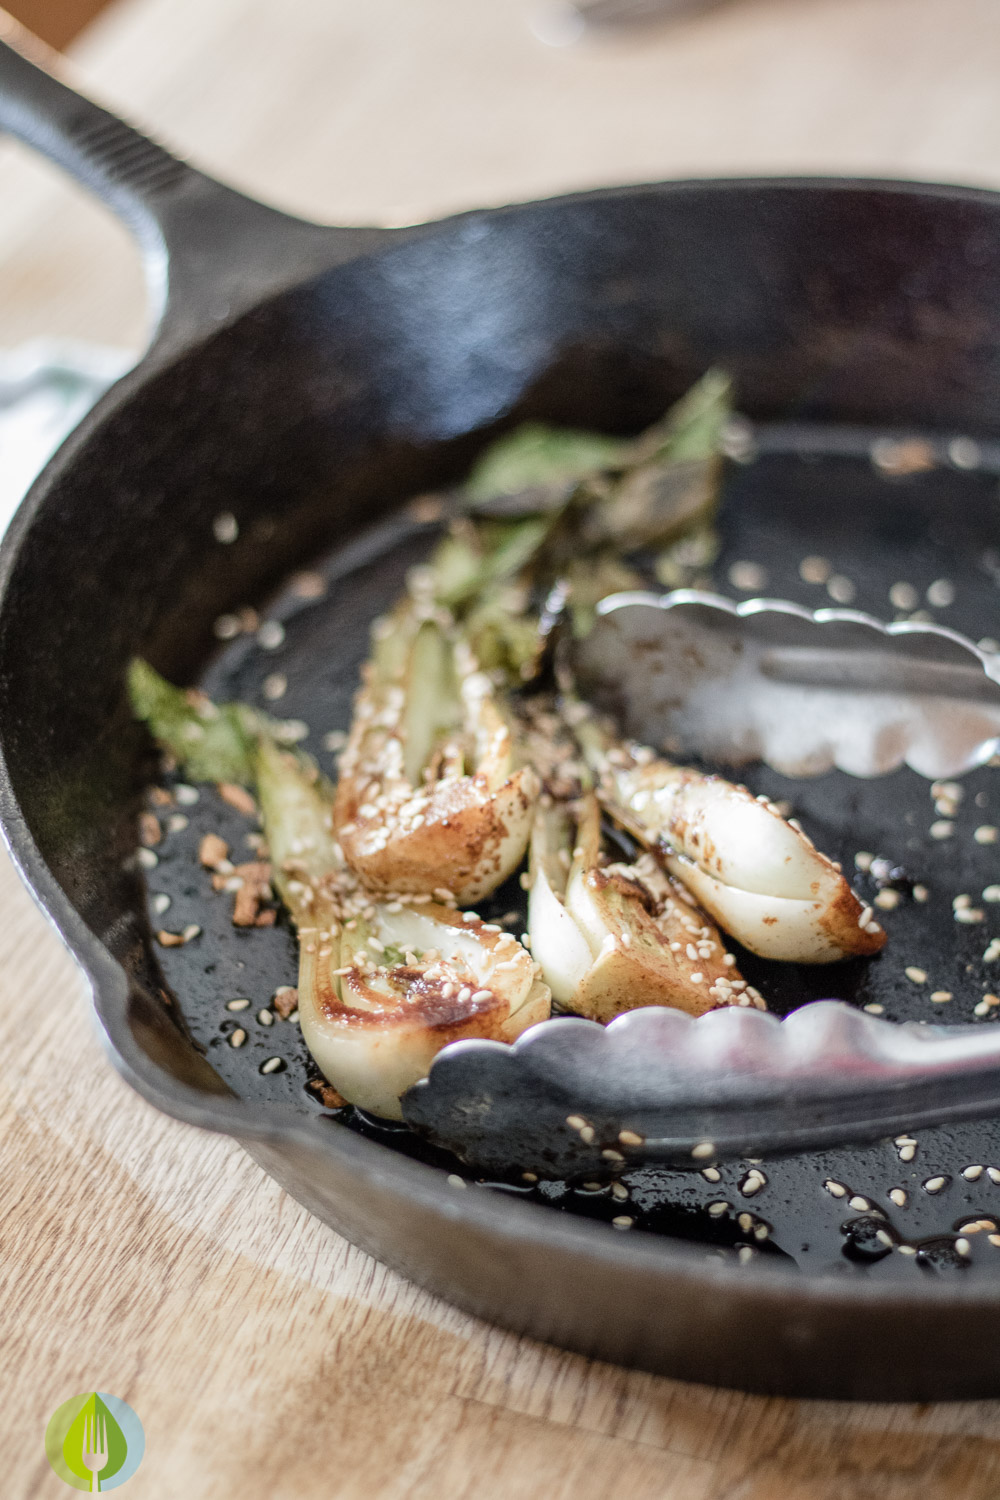 sauted baby bok choy with chili and sesame seeds in a cast iron skillet